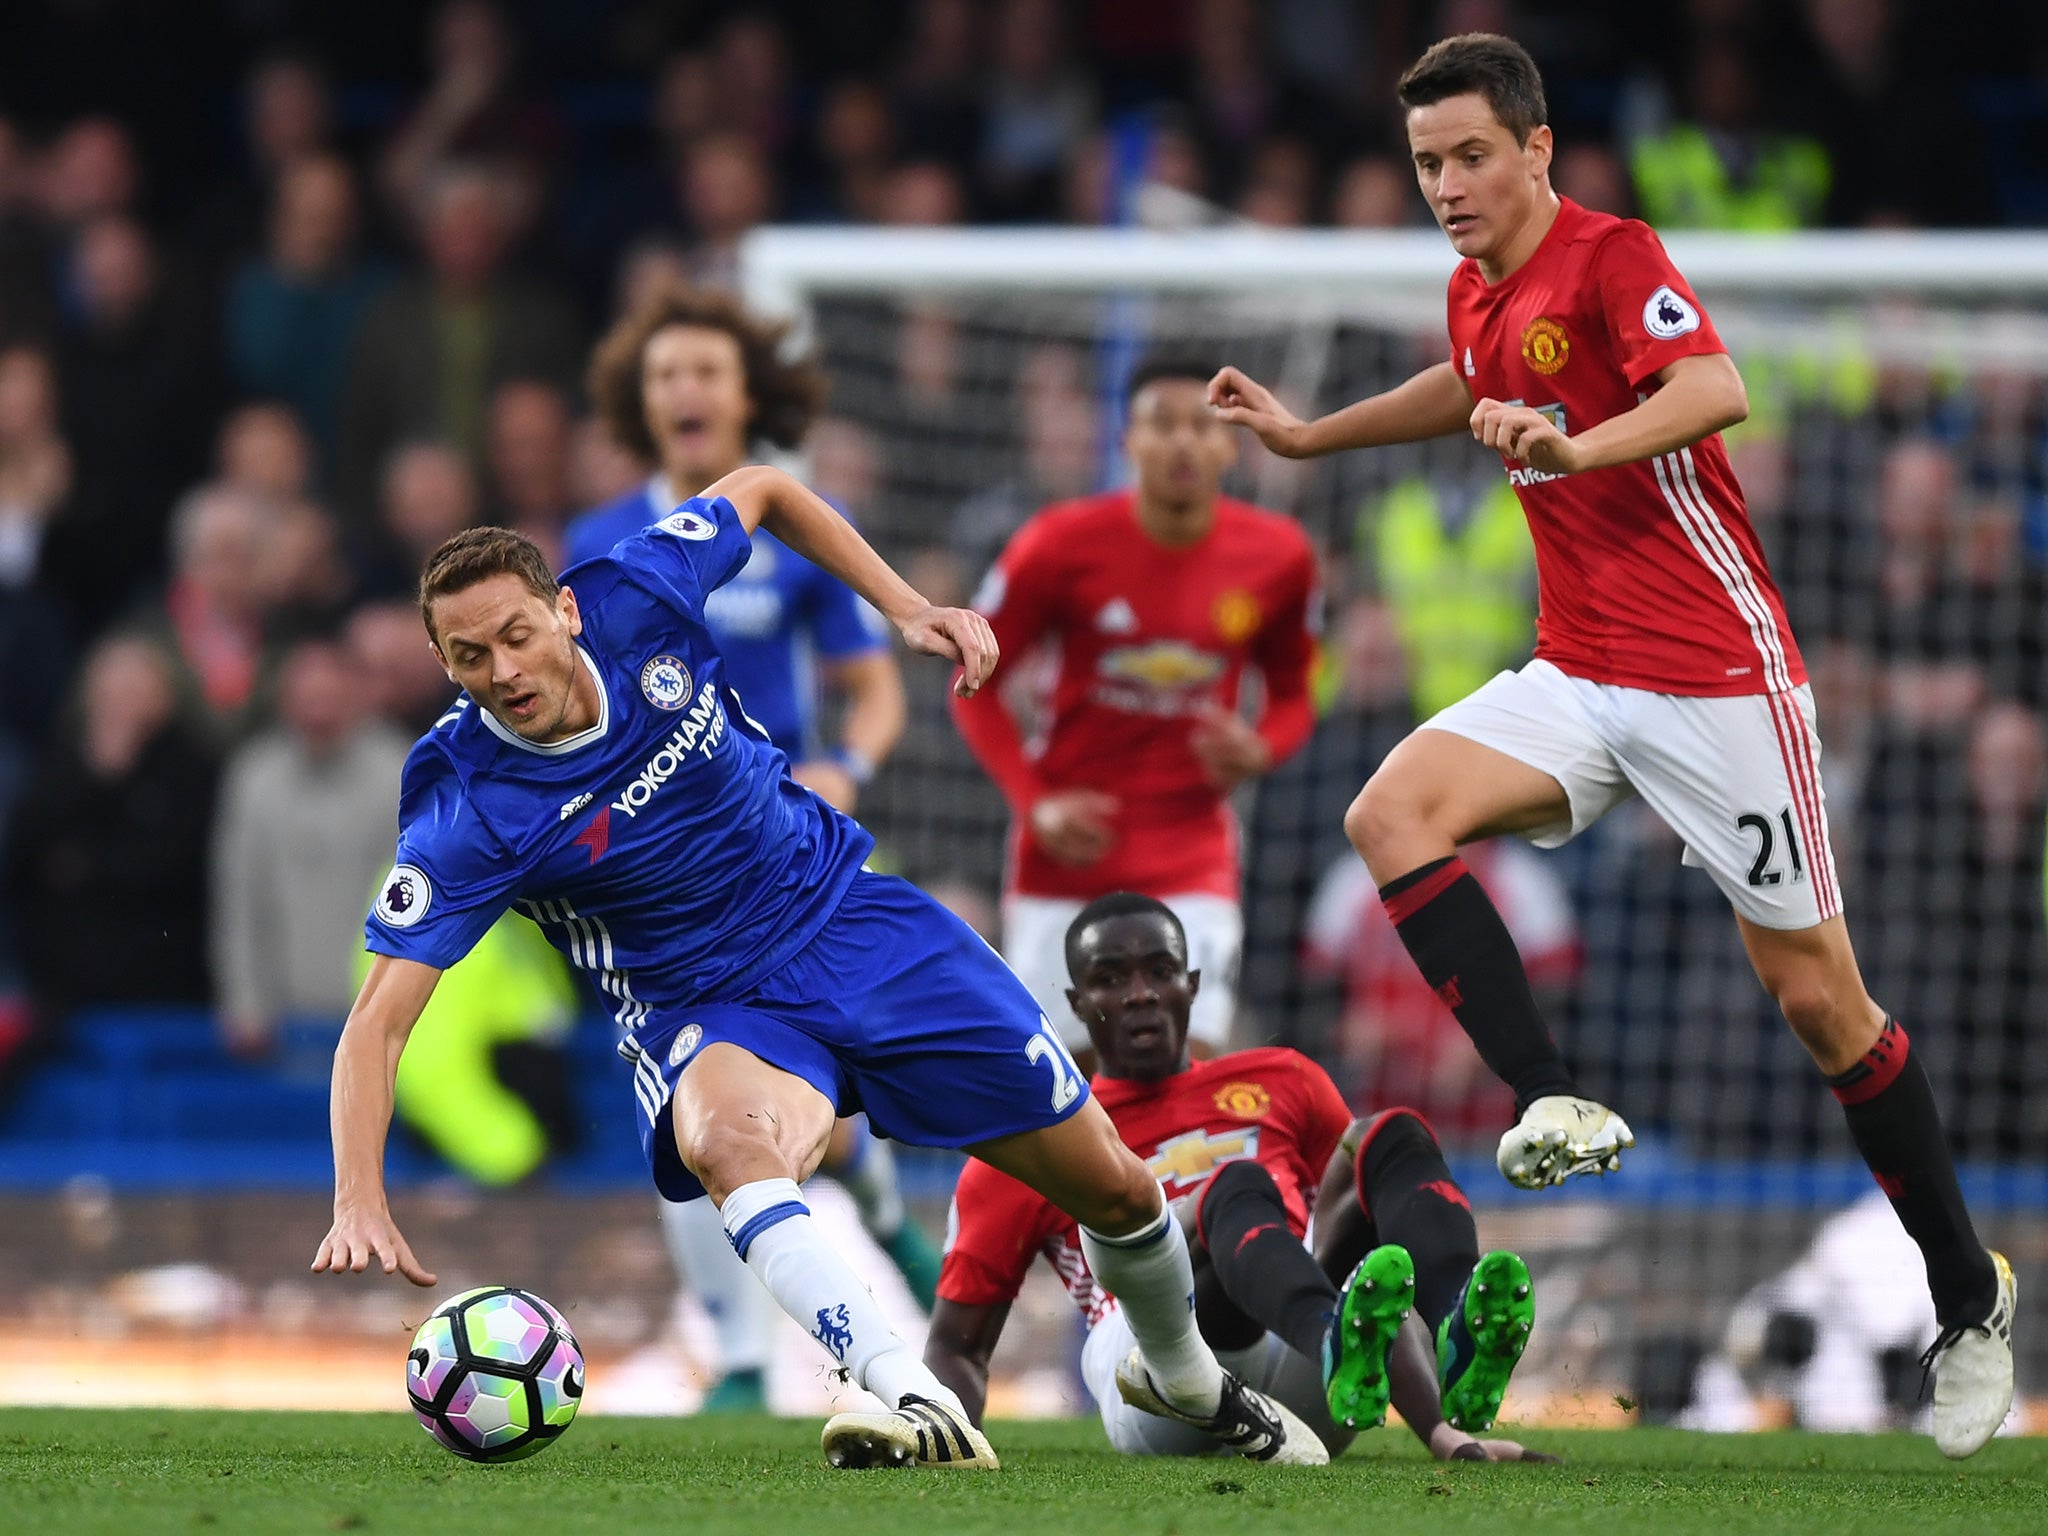 Matic jostles for the ball with United's Ander Herrera